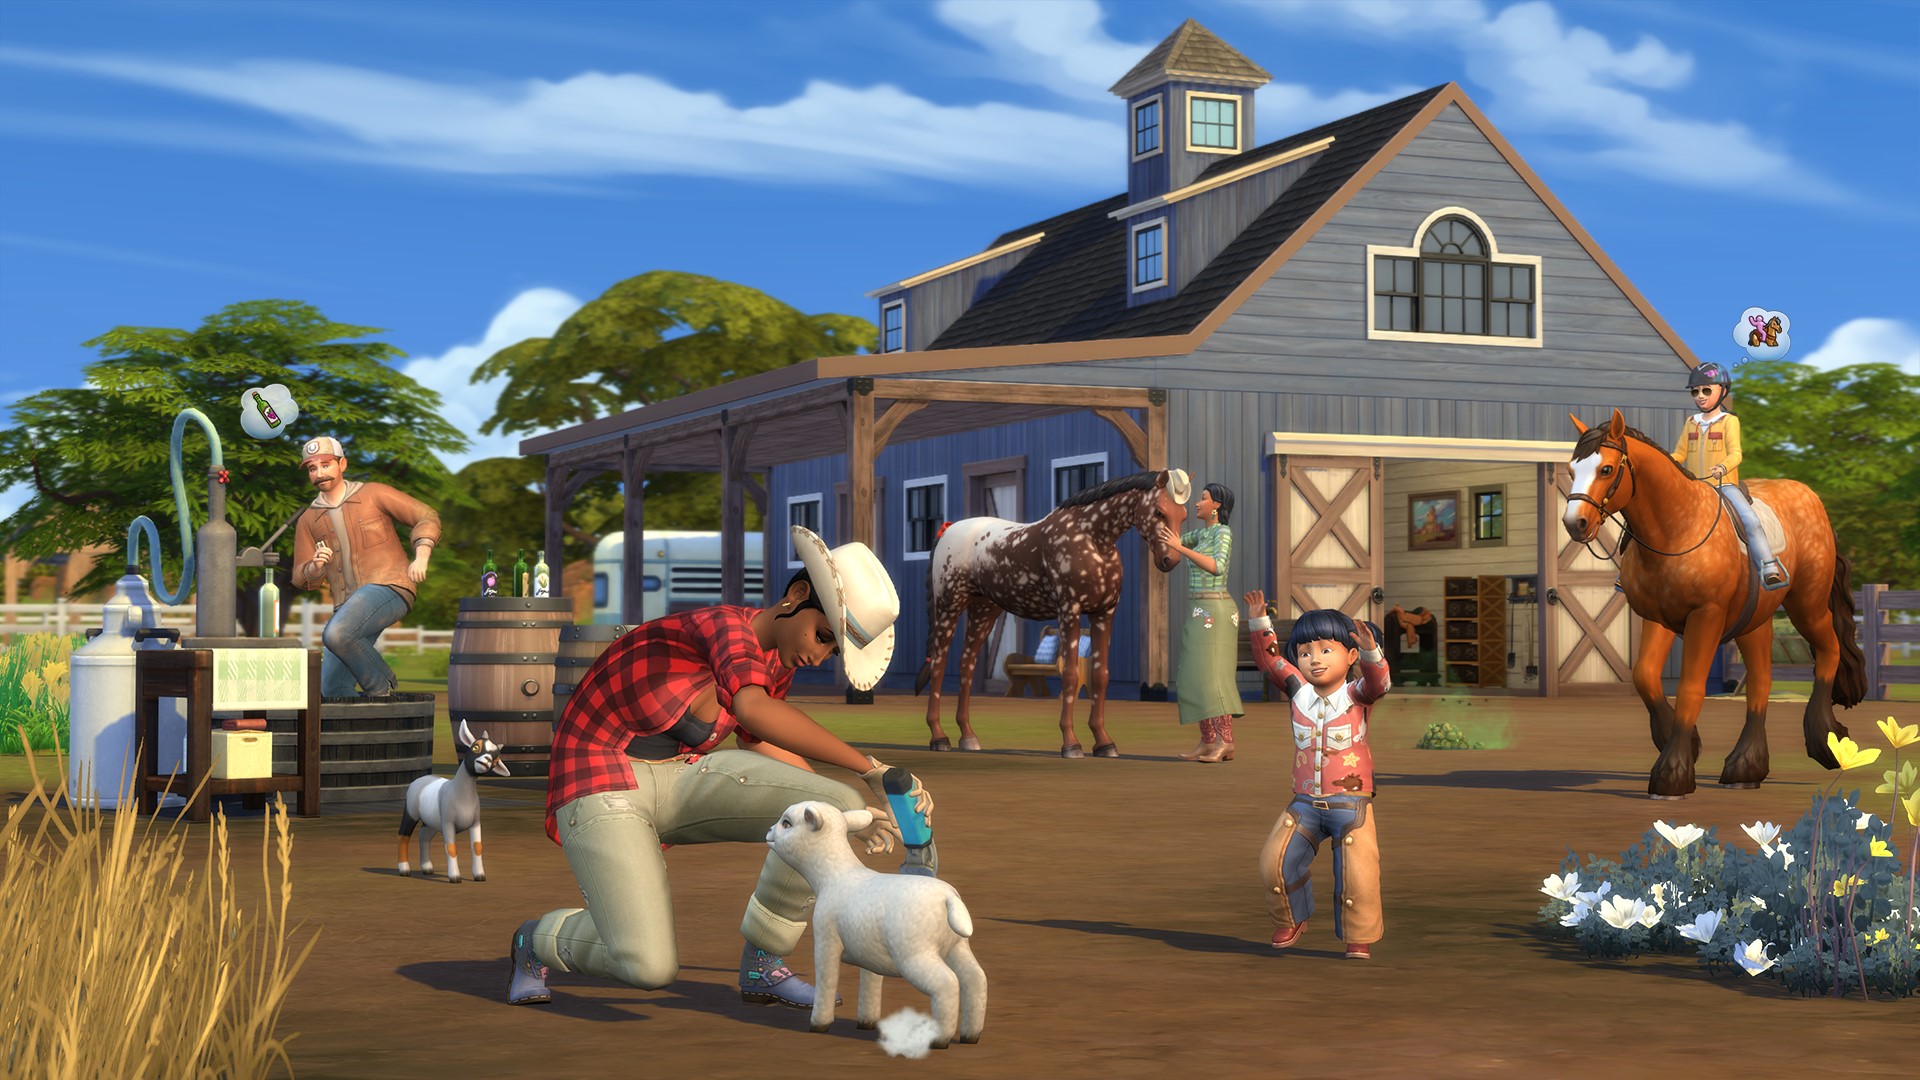 A blue stable sits in the background. A horse is being pet by a Sim in green clothes, a toddler is walking towards another Sim who is shearing a sheep, and a child Sim is riding a horse on hte right side of the picture. A fifth Sim is squashing ingredients in a large bucket to make nectar.